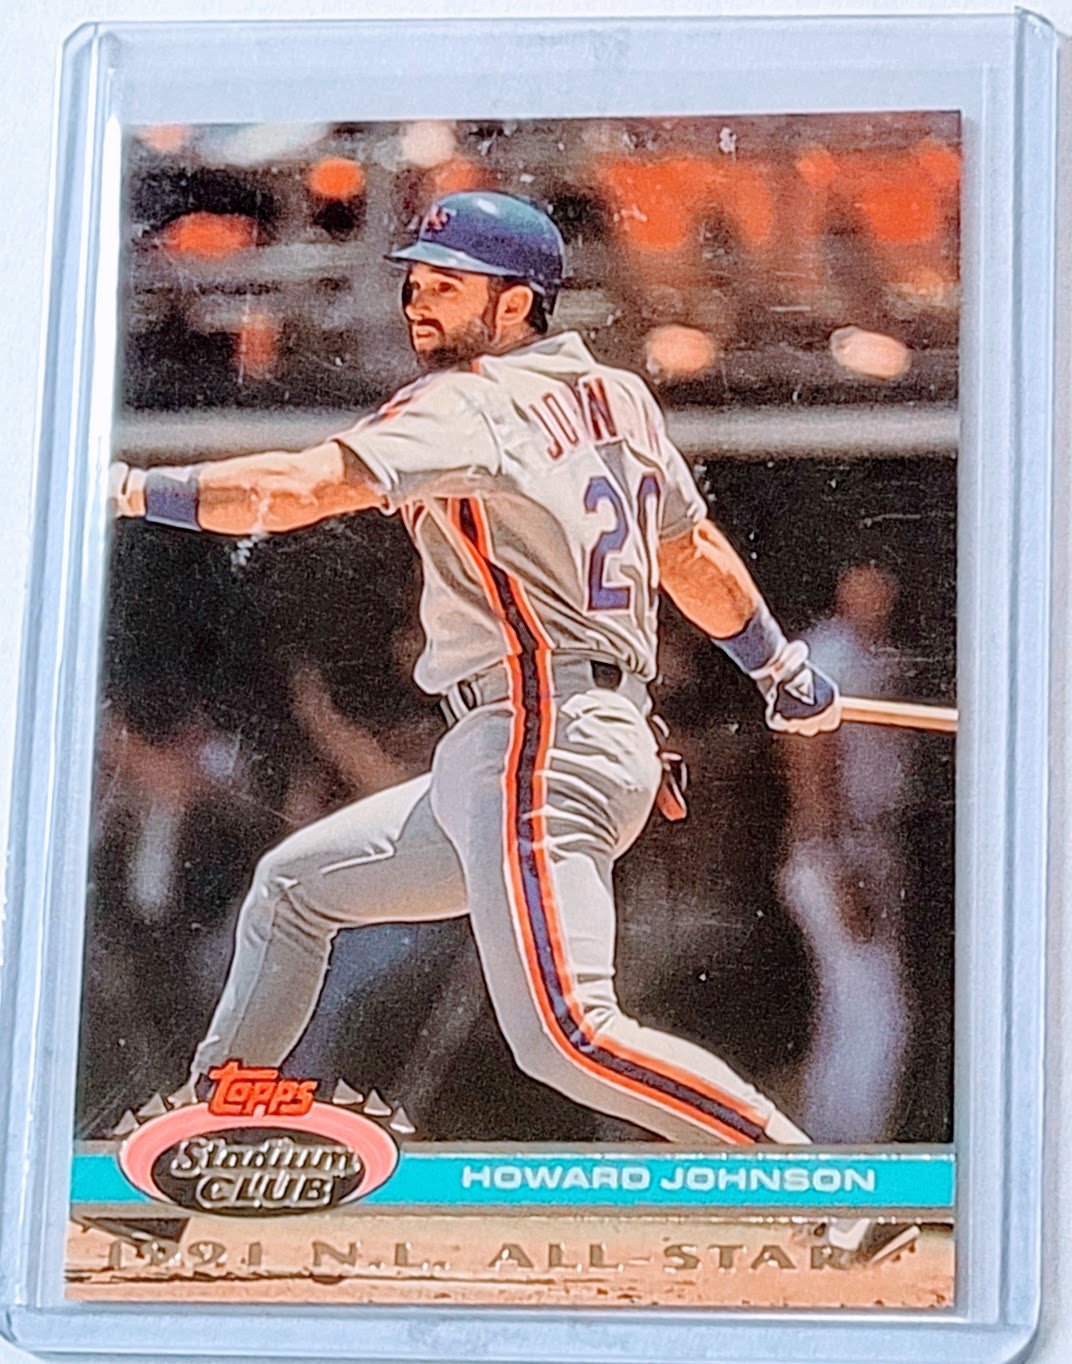 1992 Topps Stadium Club Dome Howard Johnson 1991 All Star MLB Baseball Trading Card TPTV simple Xclusive Collectibles   